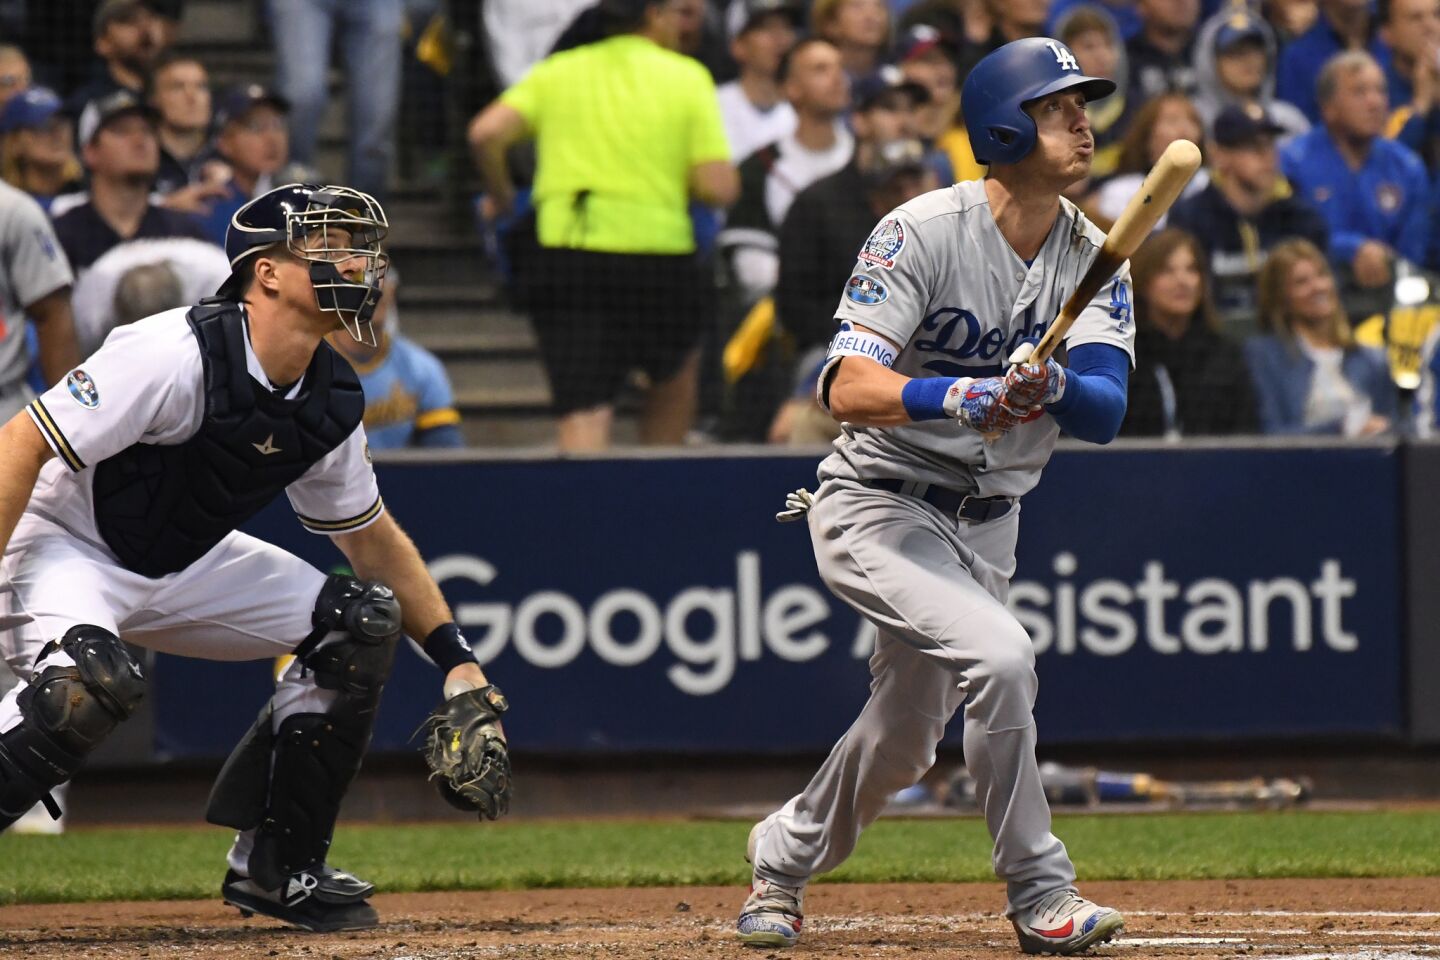 Dodgers Cody Bellinger watches his towering home run in the second inning.